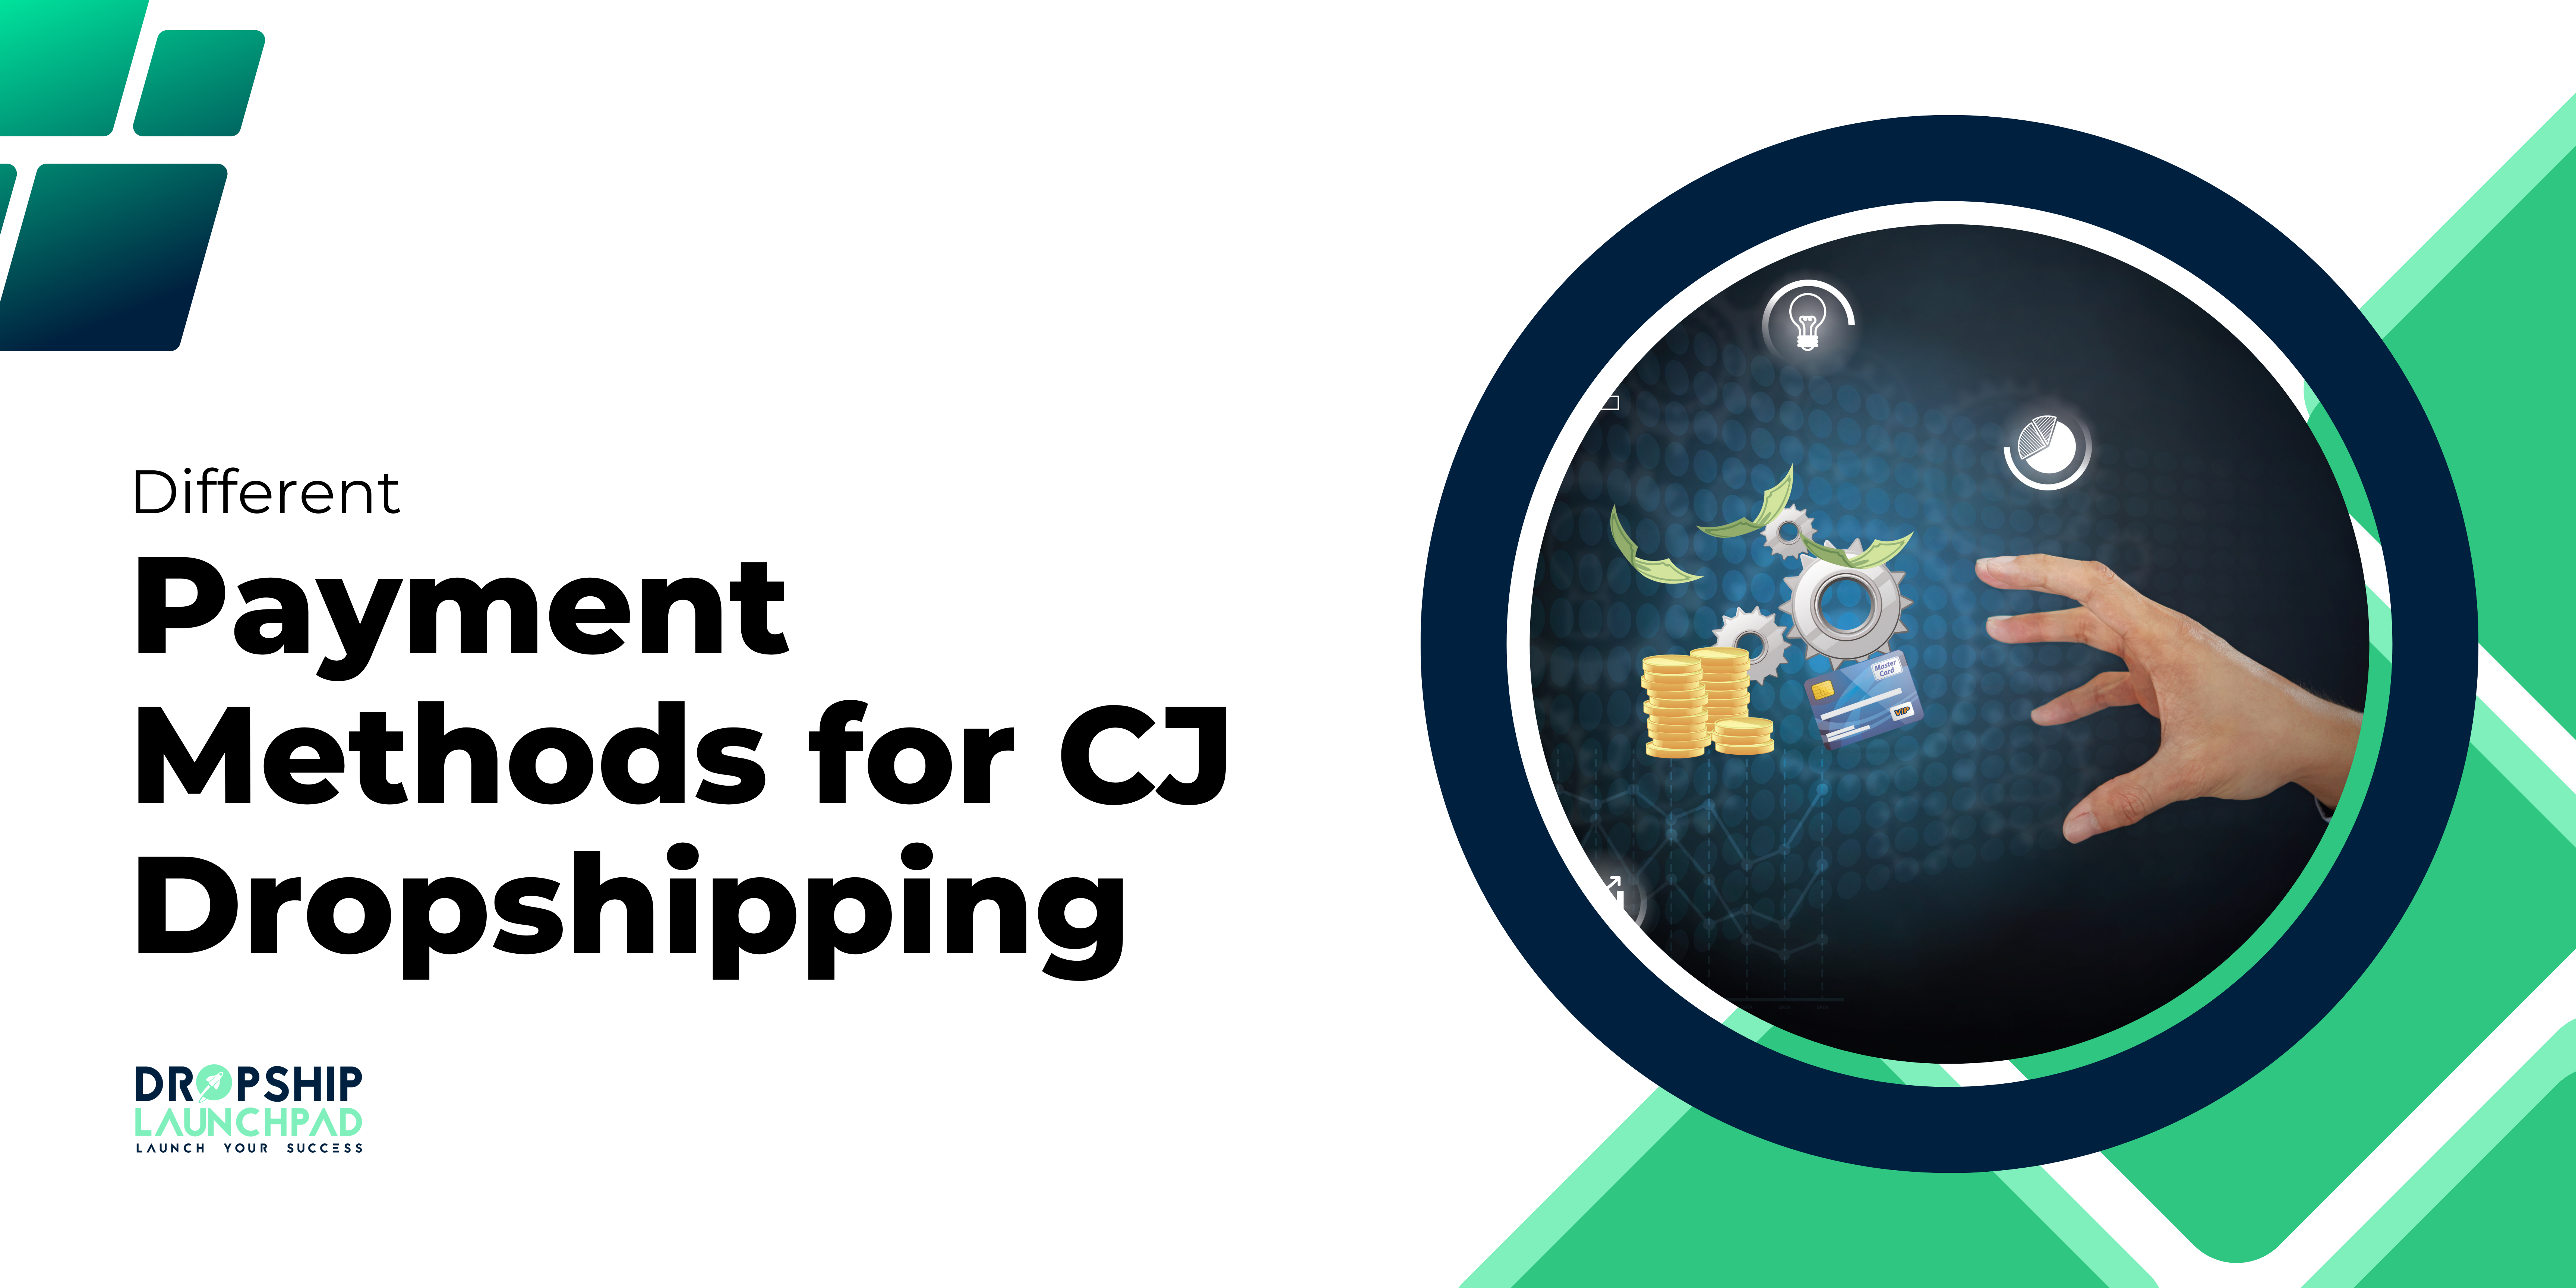 Different Payment Methods for CJ Dropshipping